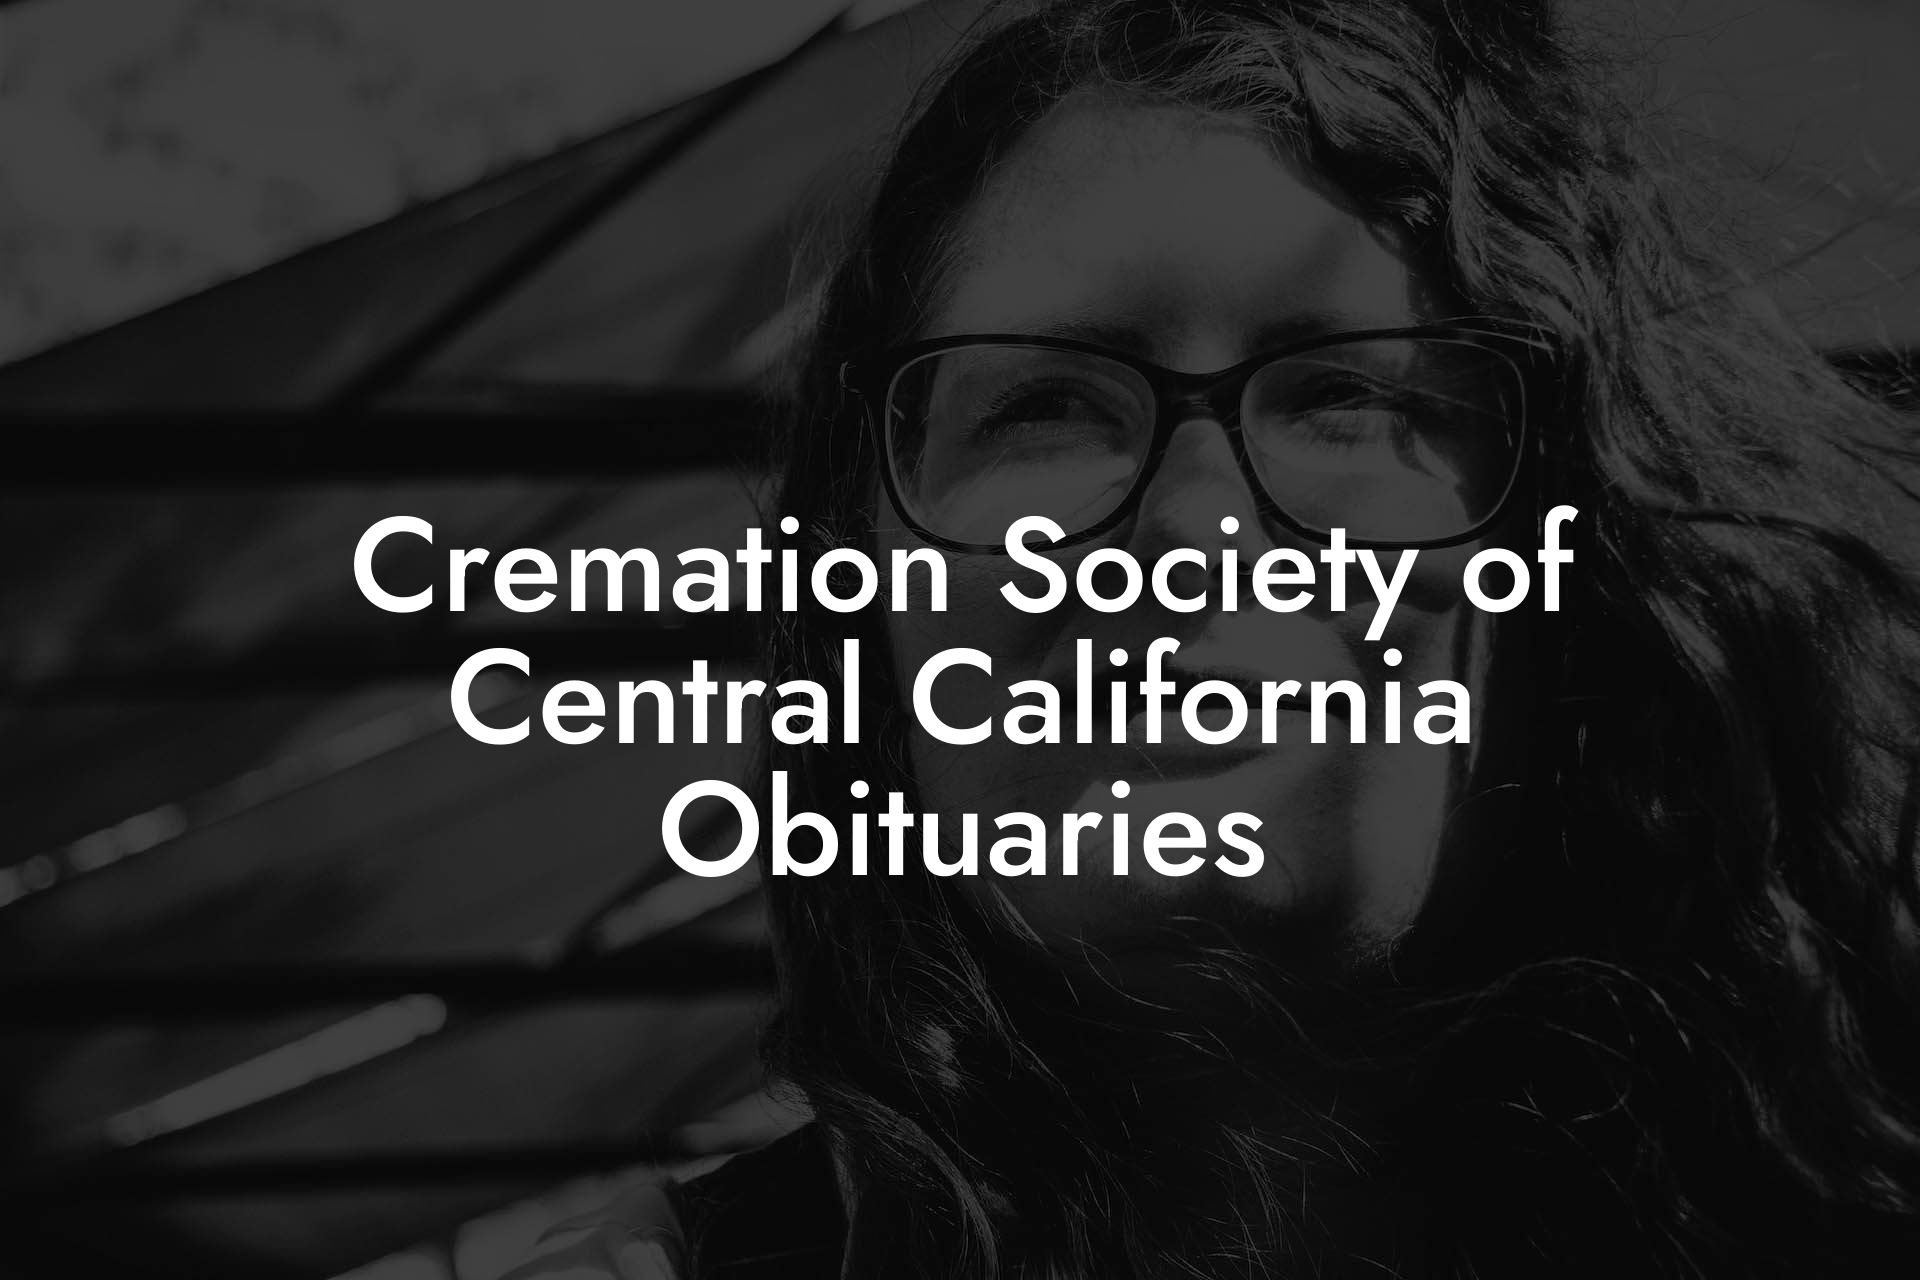 Cremation Society of Central California Obituaries